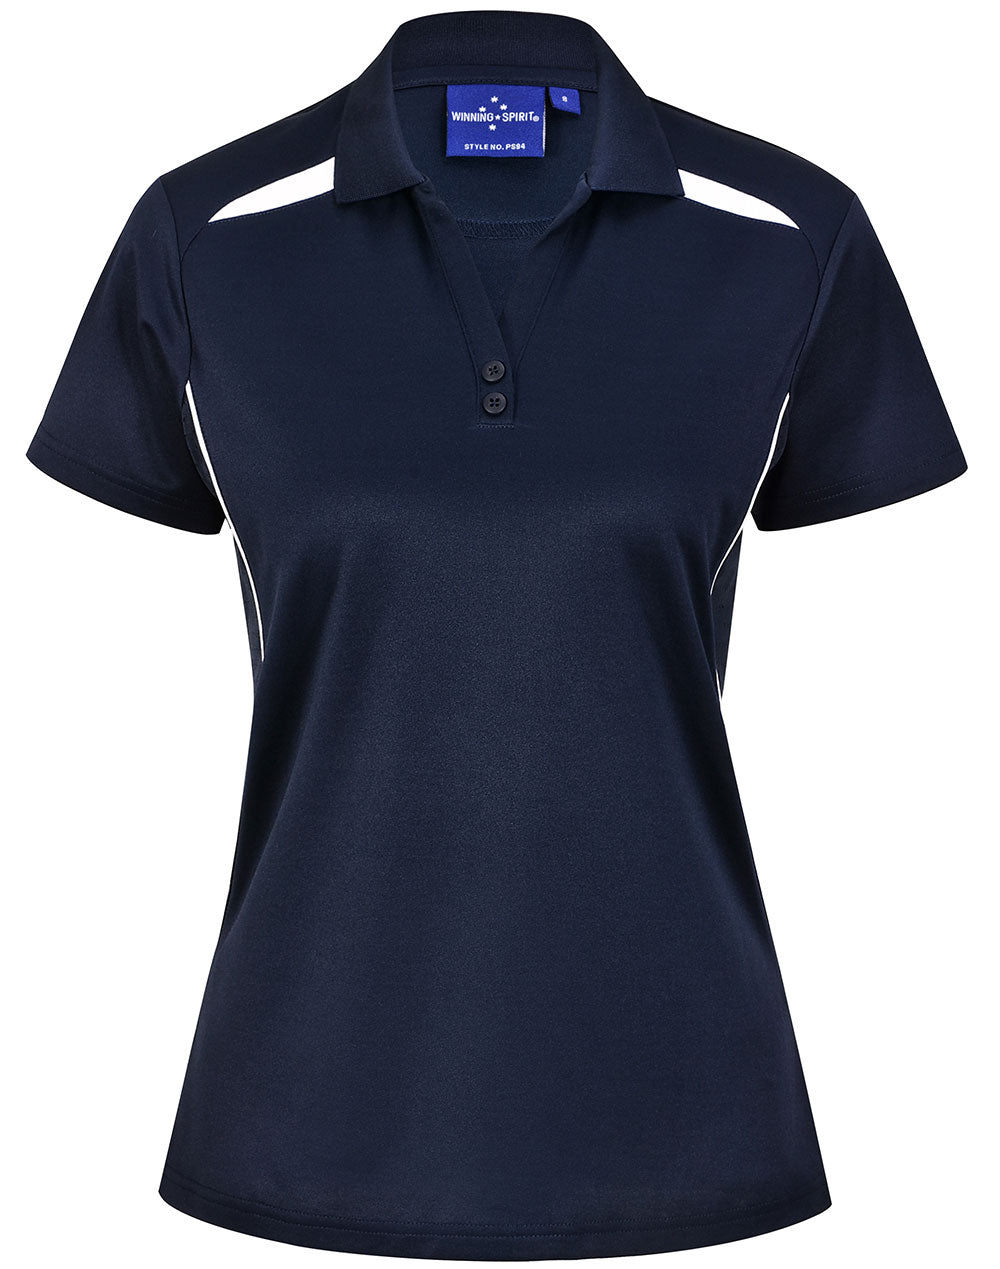 Women's Sustainable Poly/Cotton Contrast Polo Shirt PS94 Casual Wear Winning Spirit Navy/White 6 